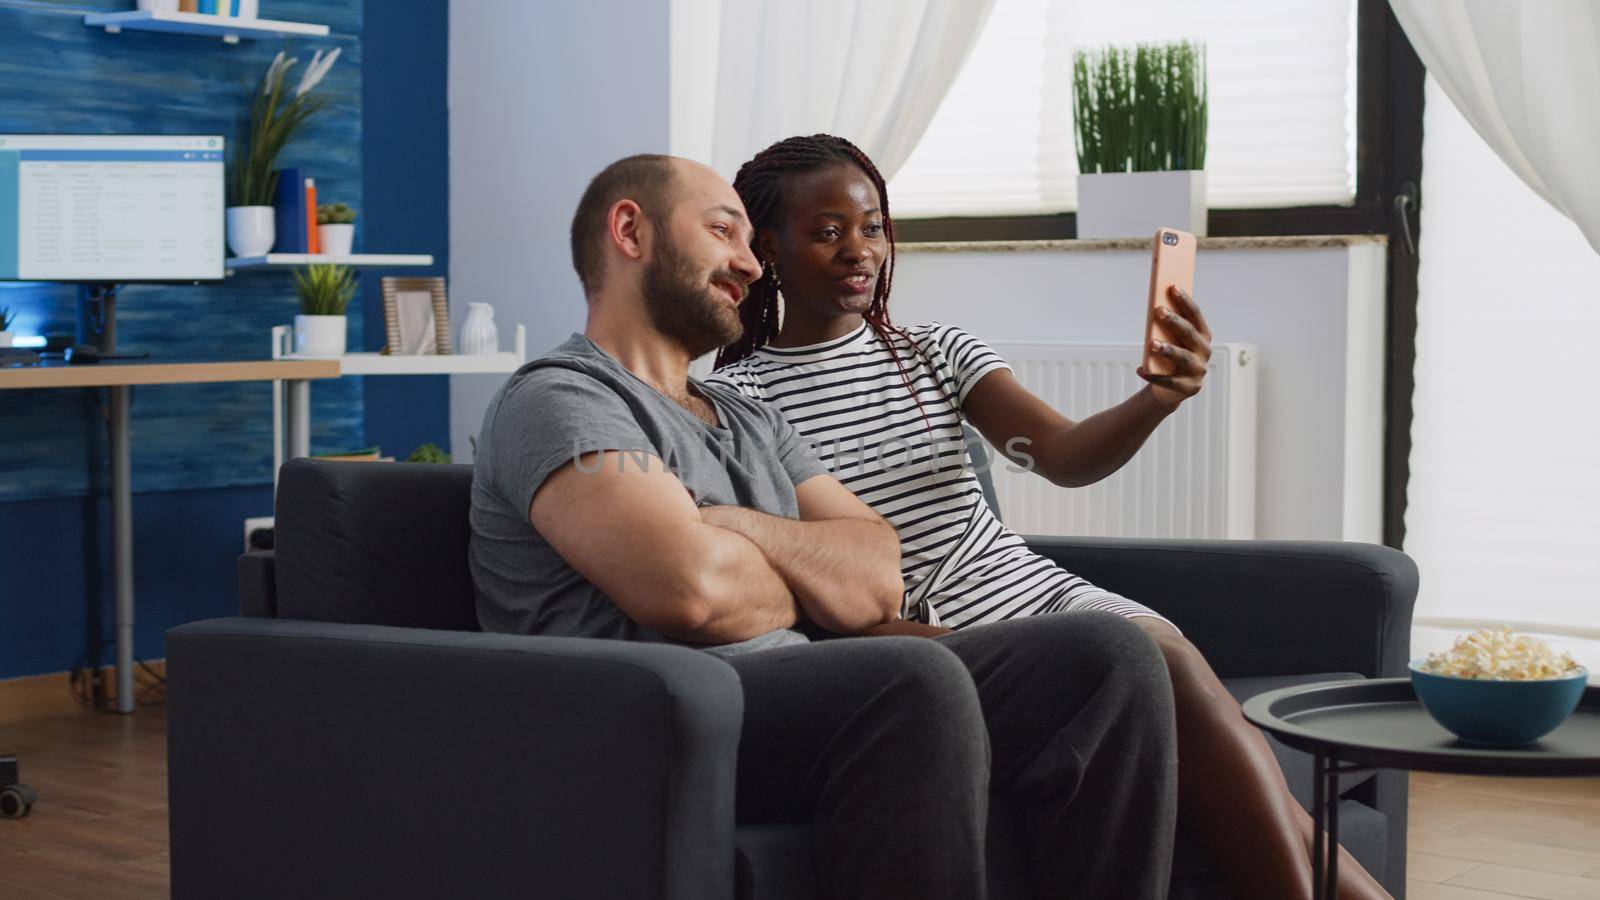 Interracial partners using video call on smartphone in living room. Cheerful multi ethnic couple chatting on online conference via internet for remote communication at home on couch